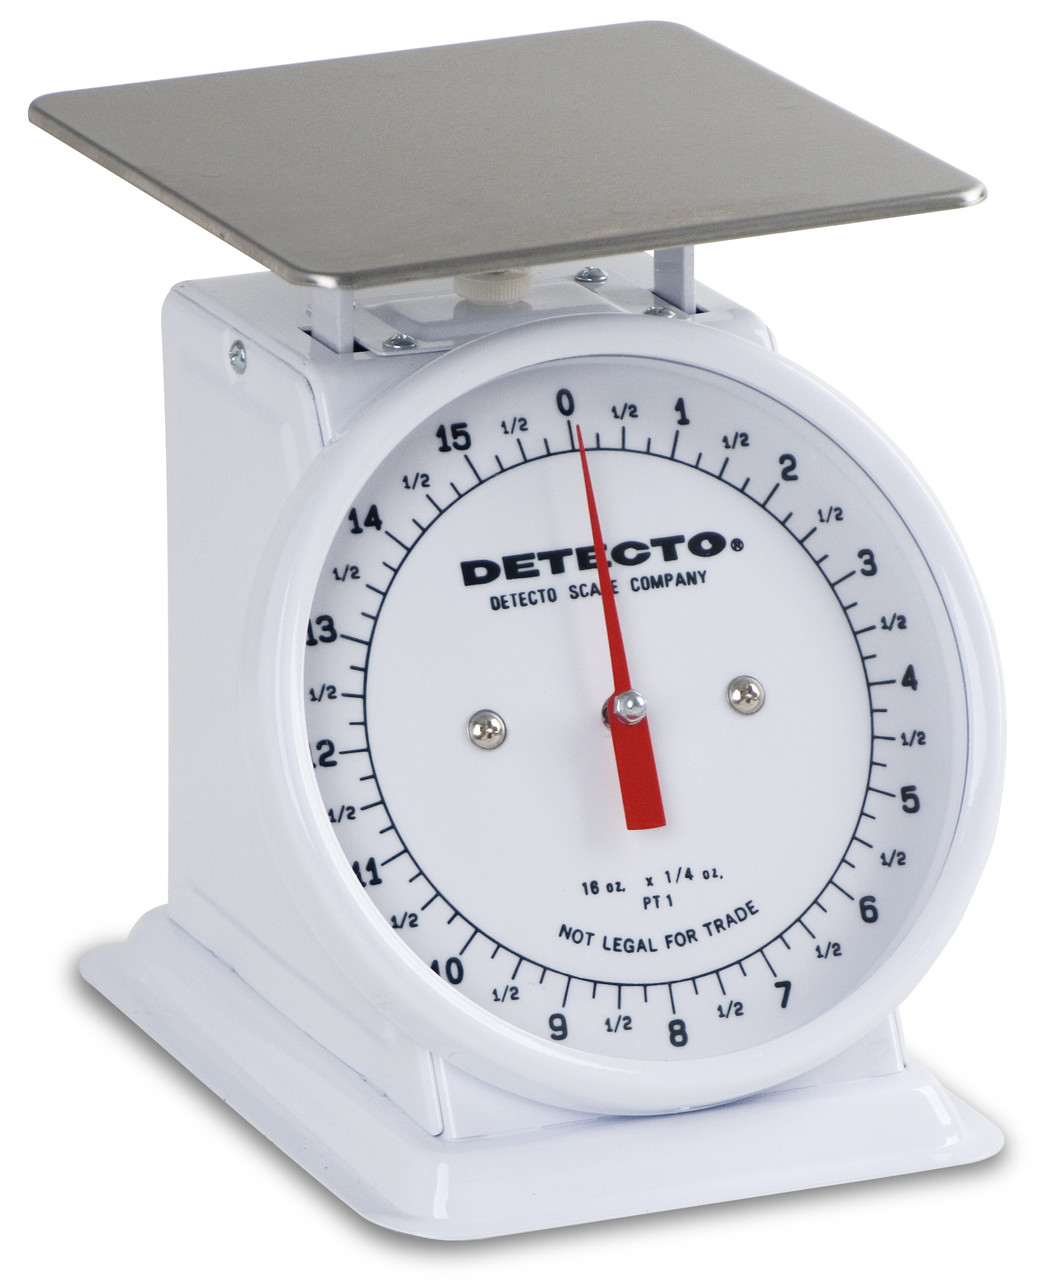 Cardinal Detecto 5.75" x 5.75" 16 Oz Top Load Fixed Dial Scale, Model# PT-1